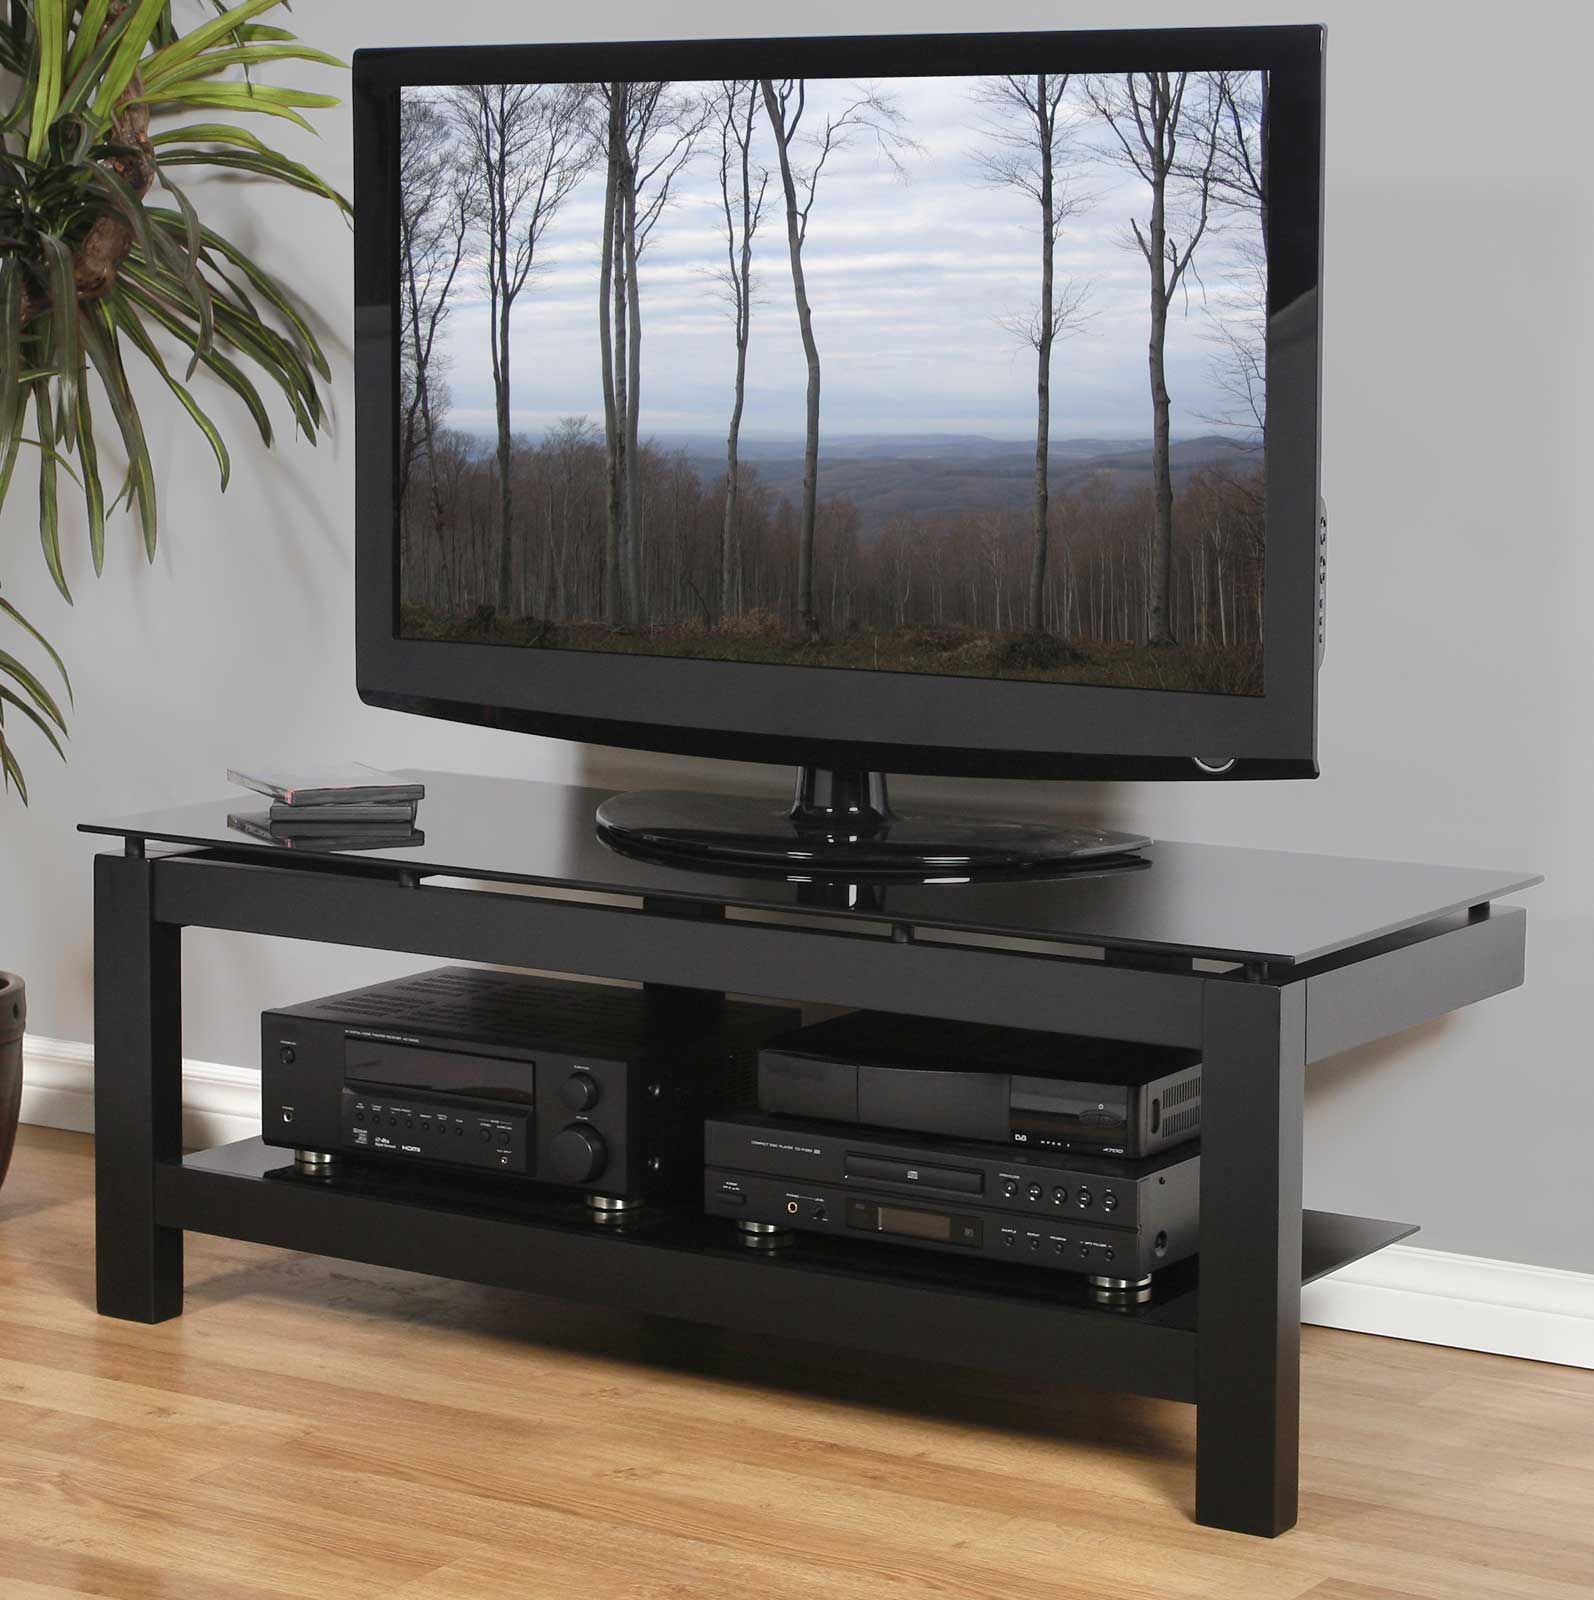 Low Profile 50 Inch Tv Stand – Black In Tv Stands For Glass Shelves Tv Stands For Tvs Up To 50" (View 14 of 15)